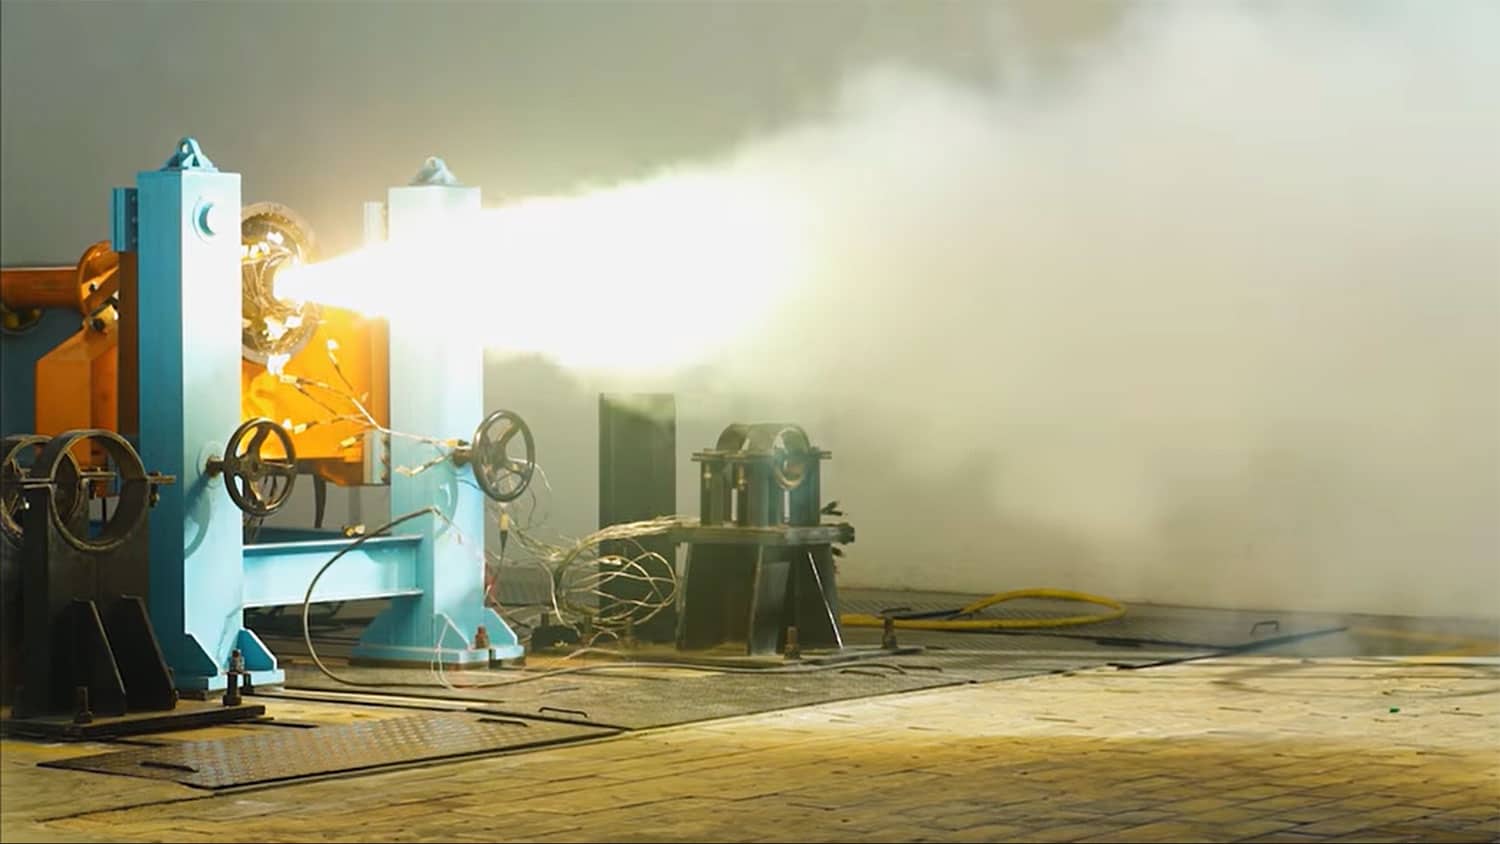 Successful test firing of our Solid rocket propulsion stage demonstrator ‘Kalam-5’.